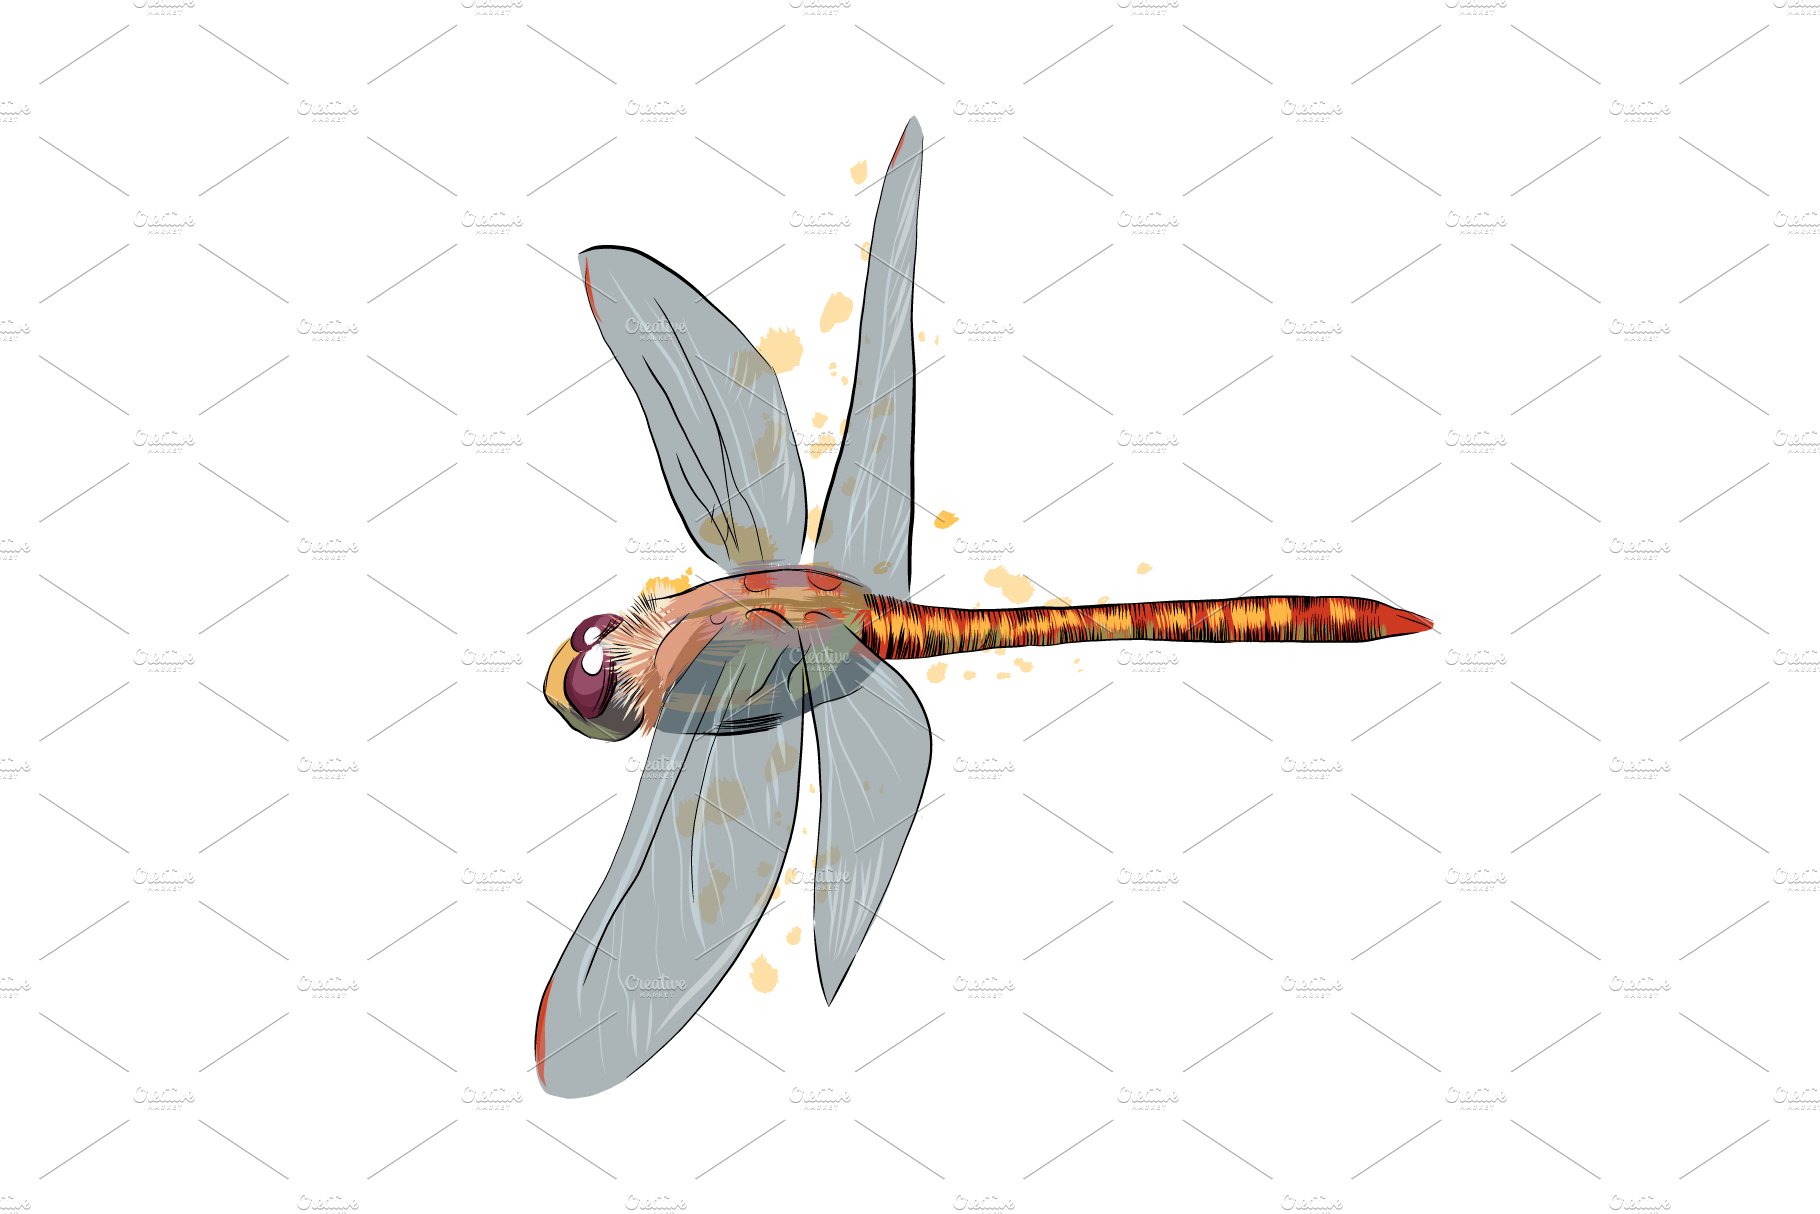 Dragonfly from a splash cover image.